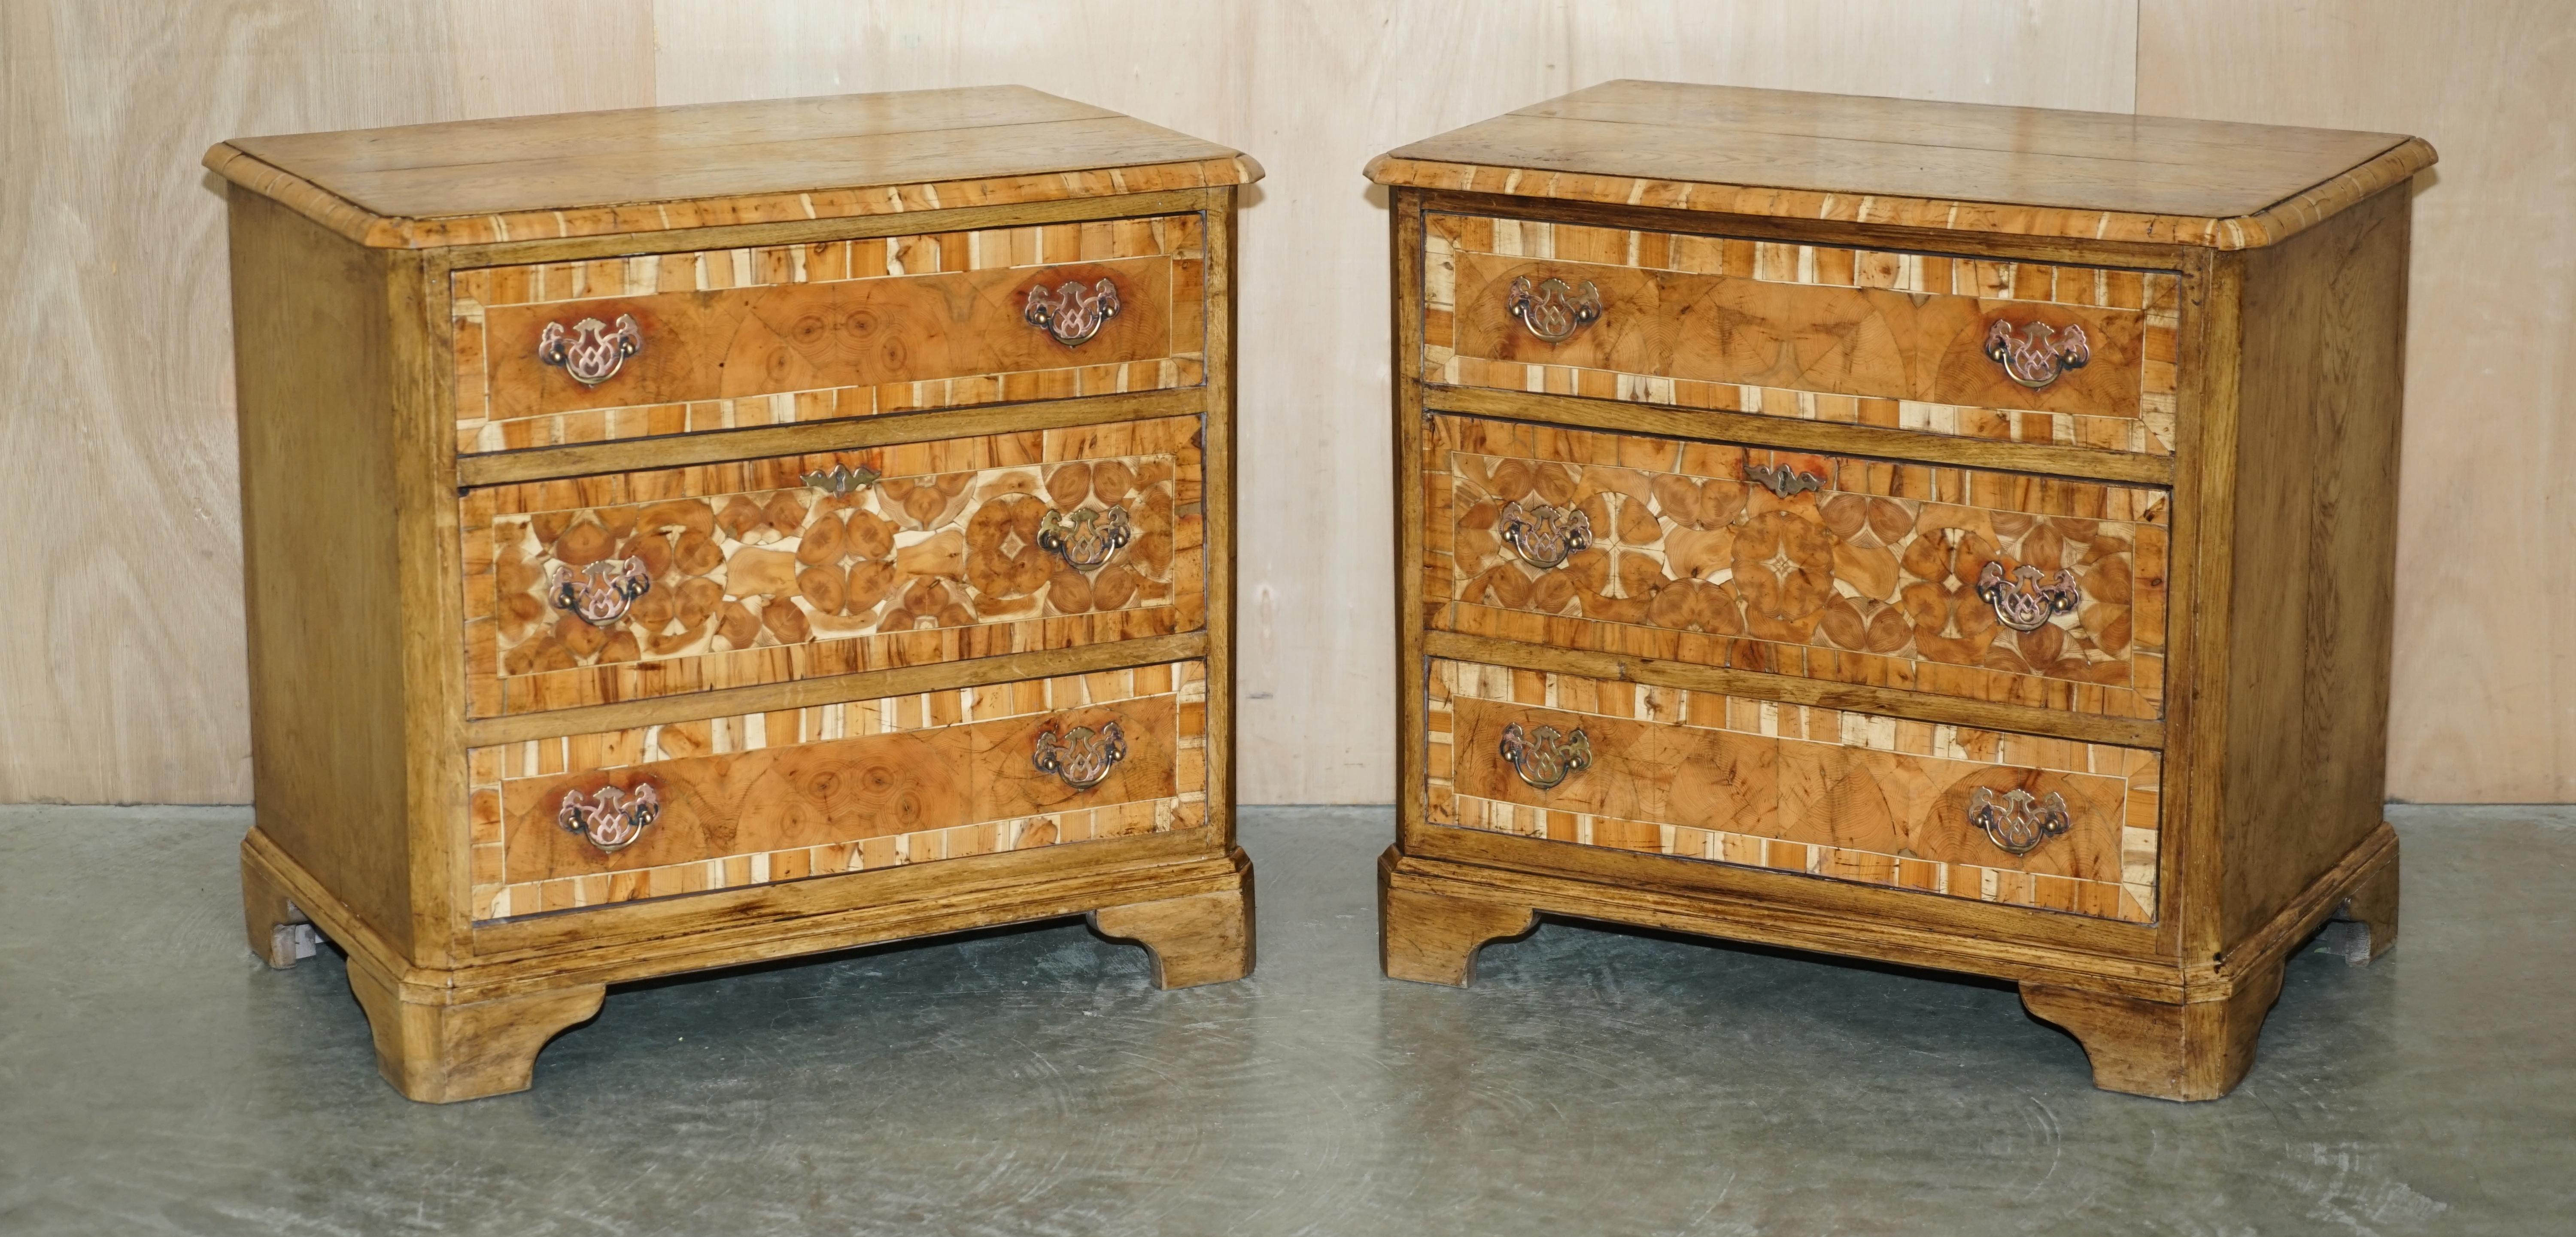 We are delighted to offer for sale this sublime Pine with Oyster / Laburnum wood finish which dates to the end of the William & Mary era circa 1700 pair of a large nightstand / small Chest of Drawers sized

Wow, I mean just wow..... These are